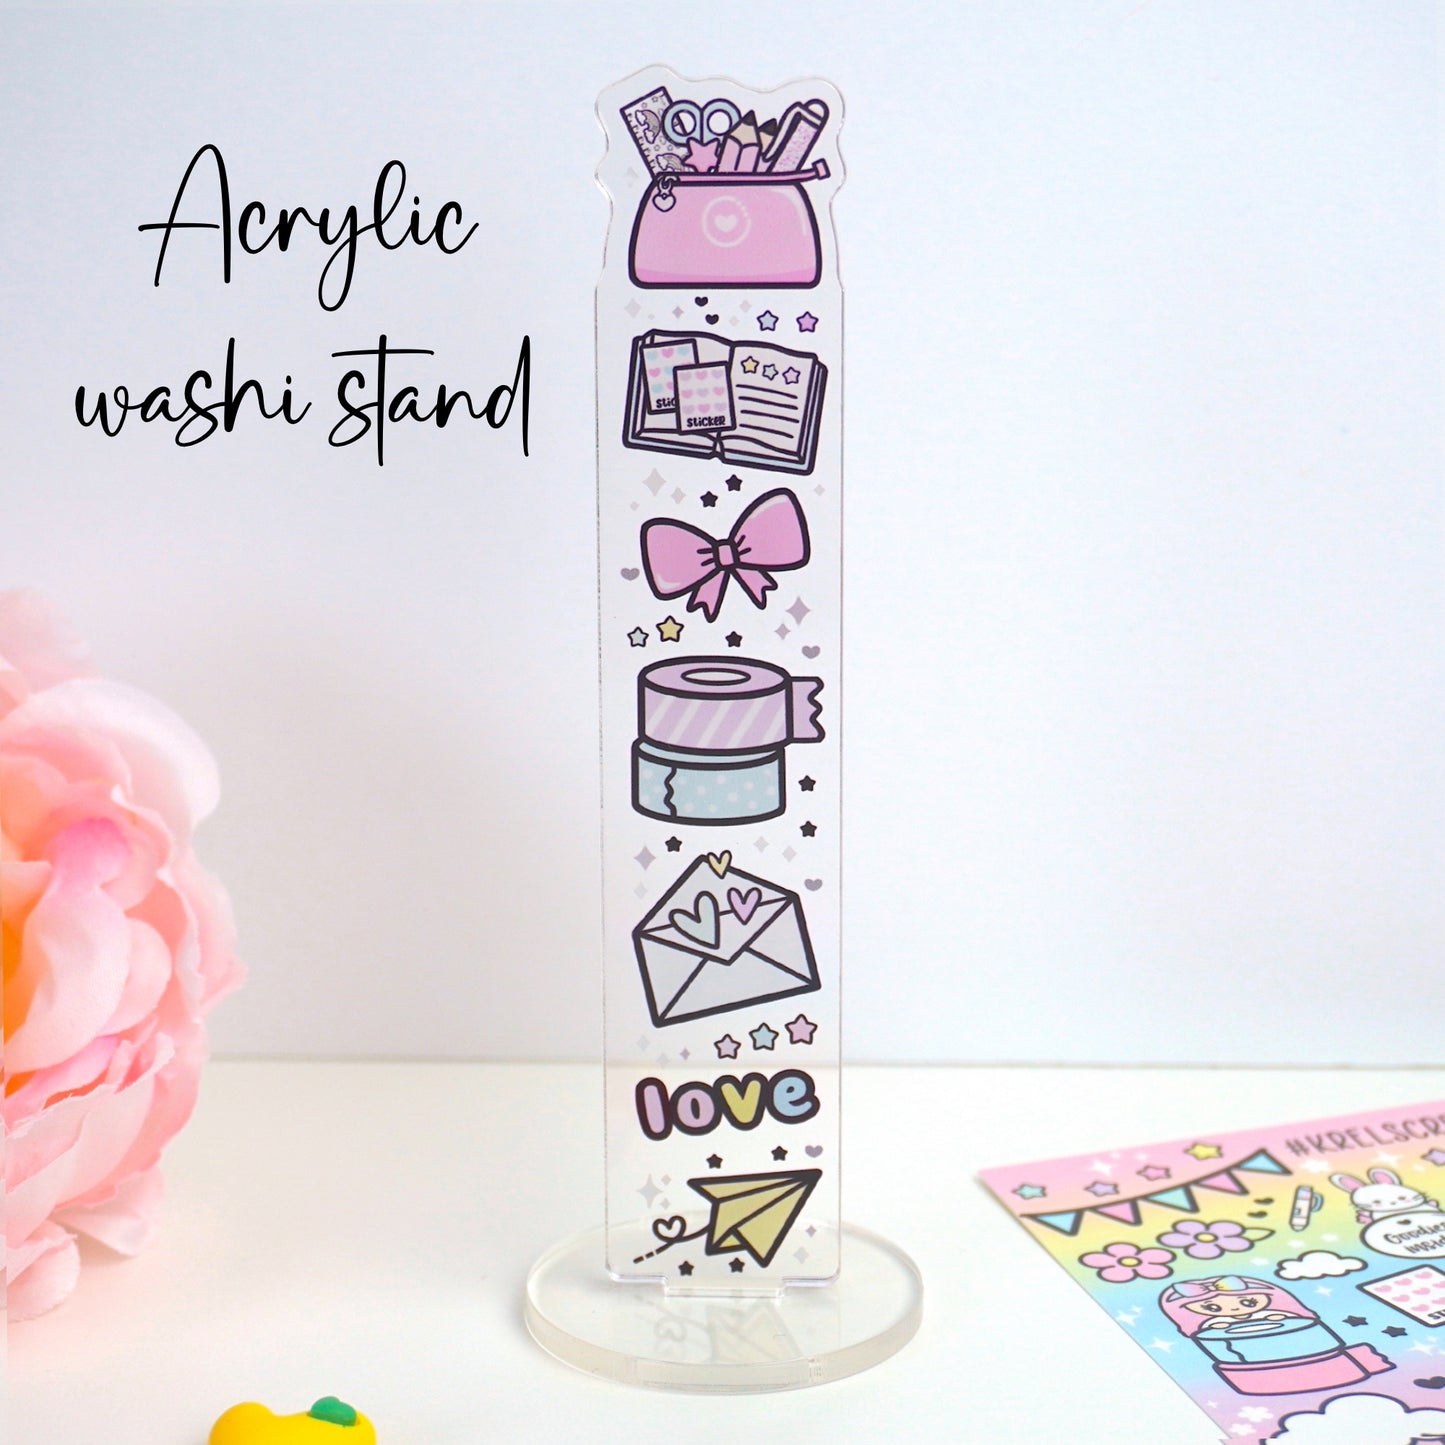 Acrylic Washi Stand | Love doodles